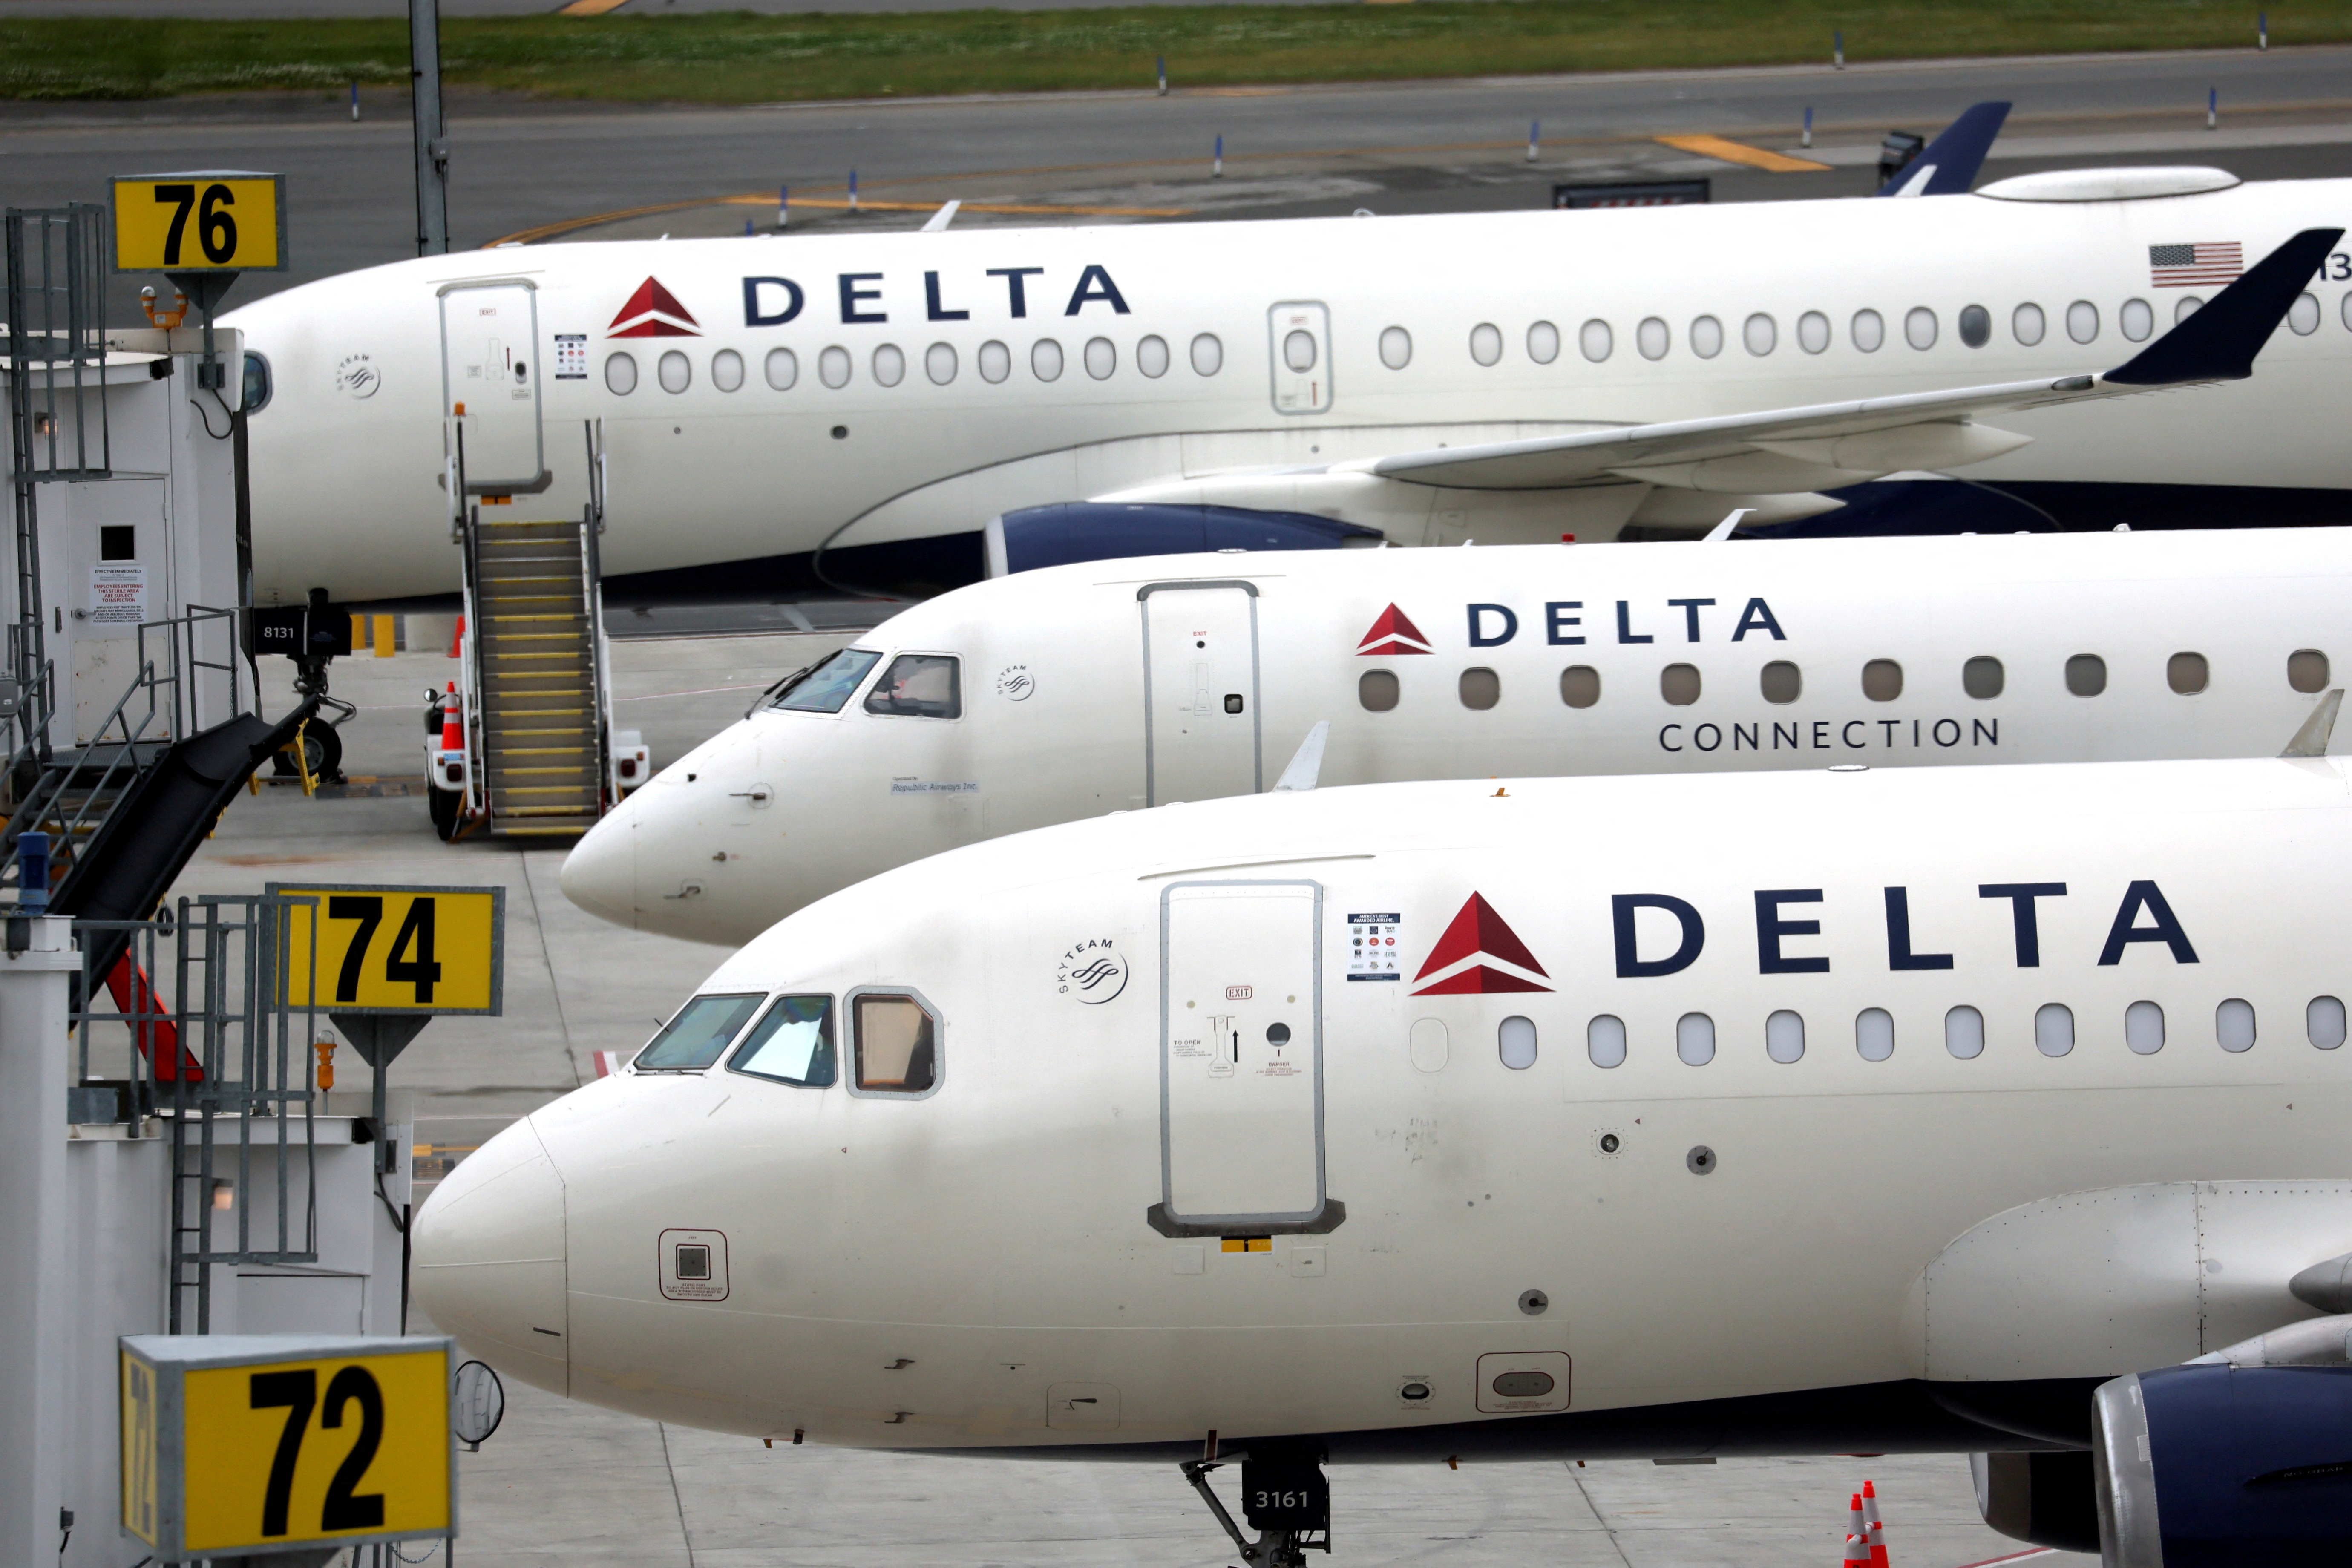 Delta Air Lines Just Made an Unprecedented Change That Should Make  Customers Very Happy. Every Airline Should Follow Its Lead